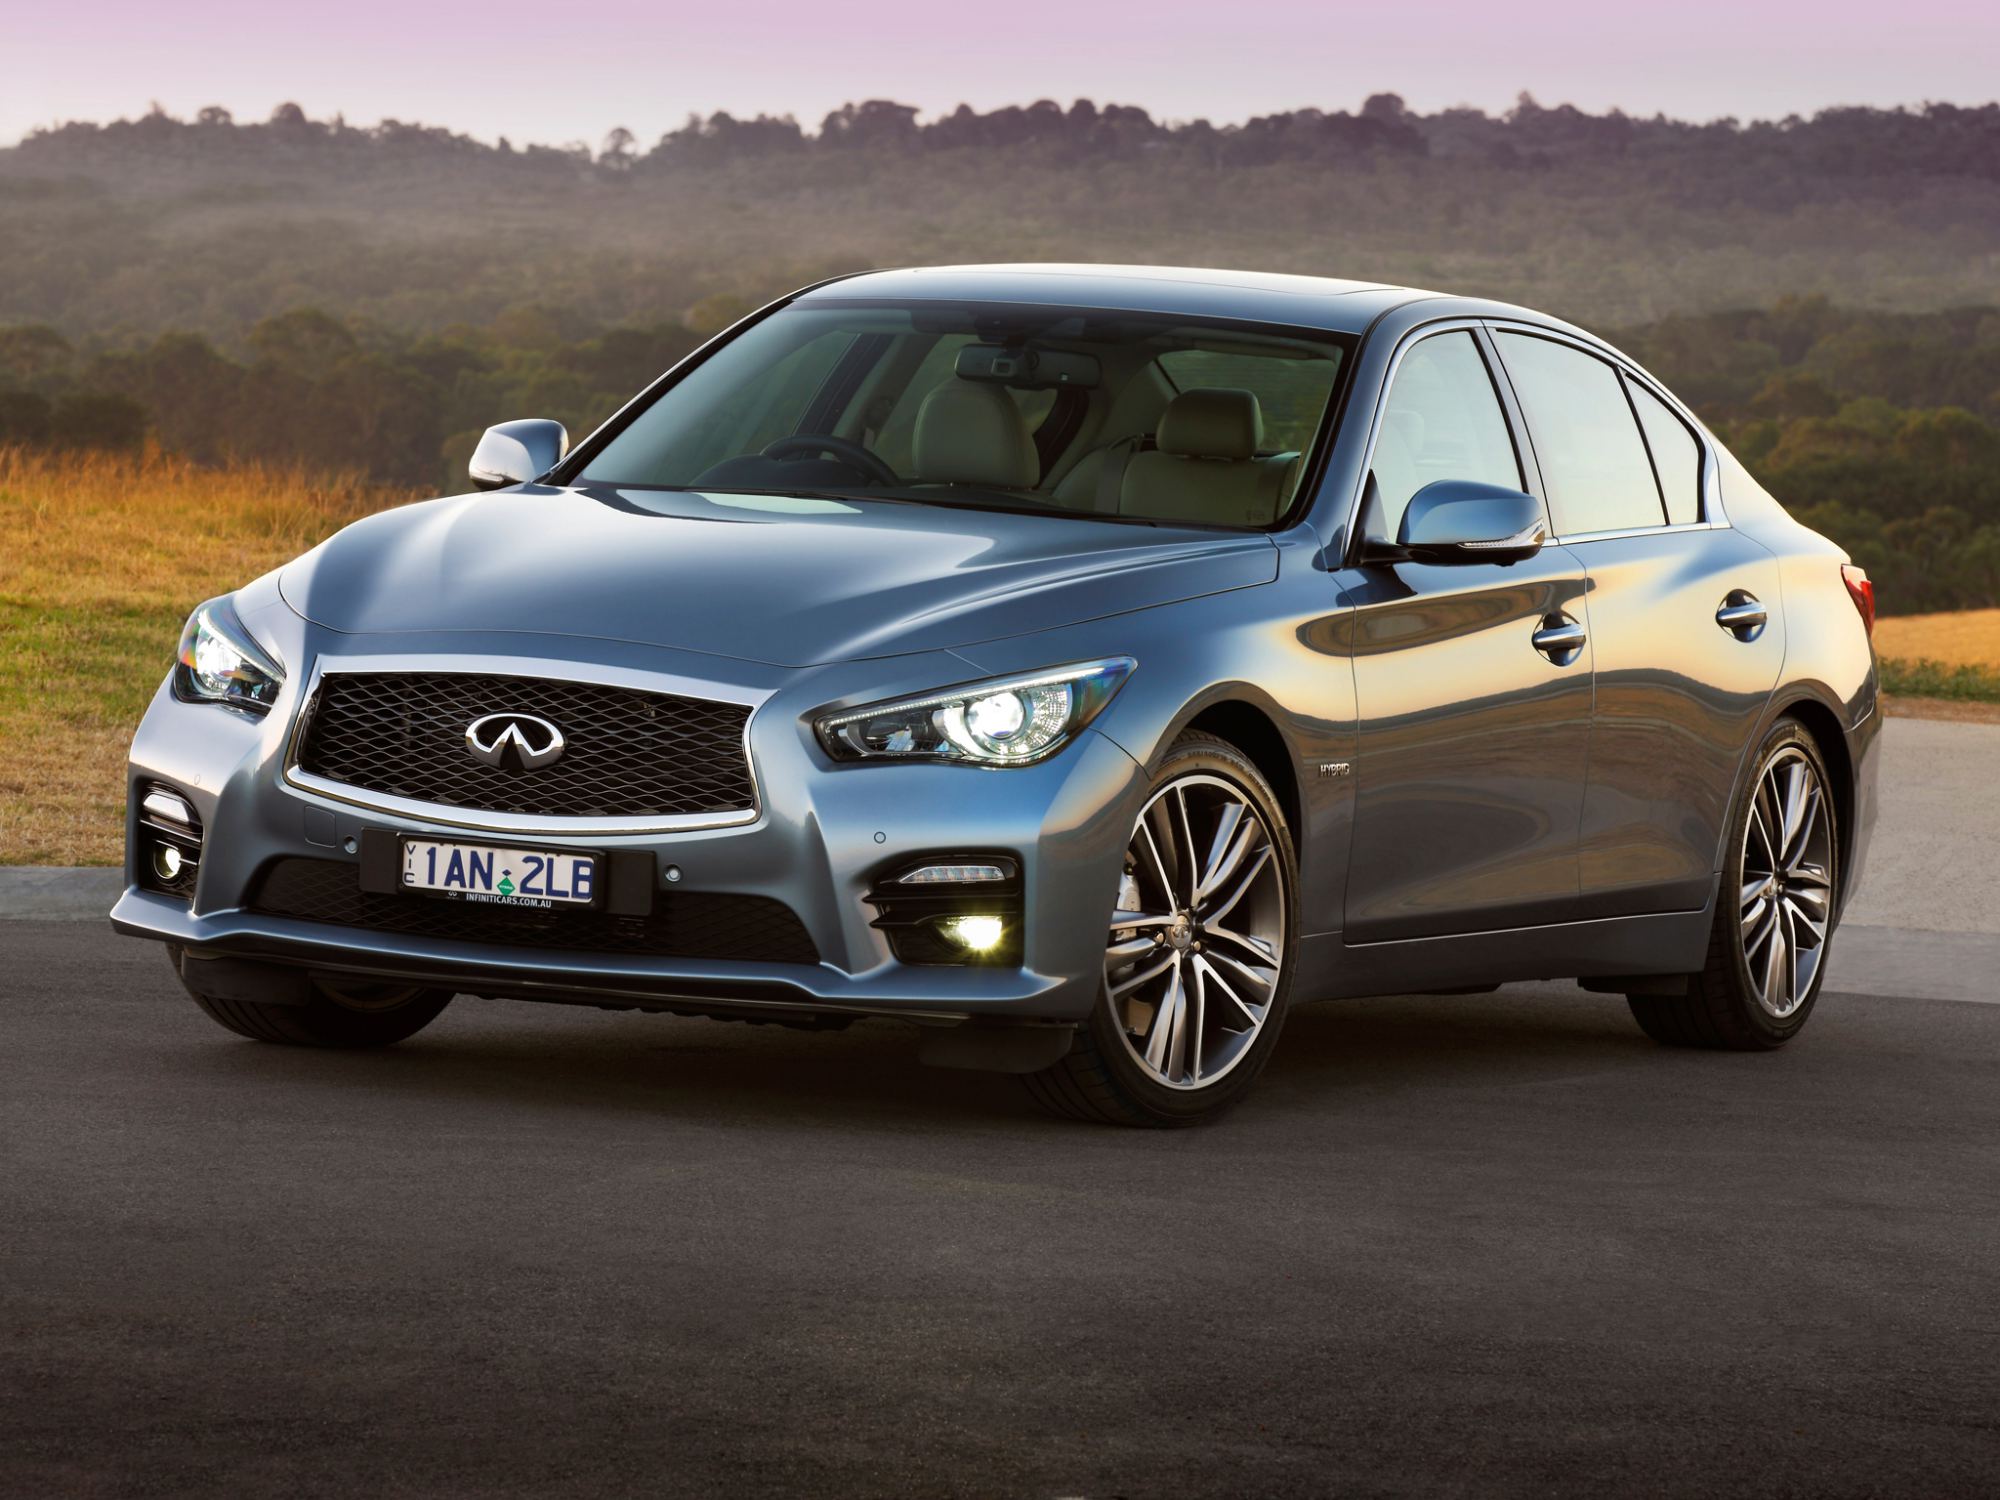 Review - 2017 Infiniti Q50 - Review